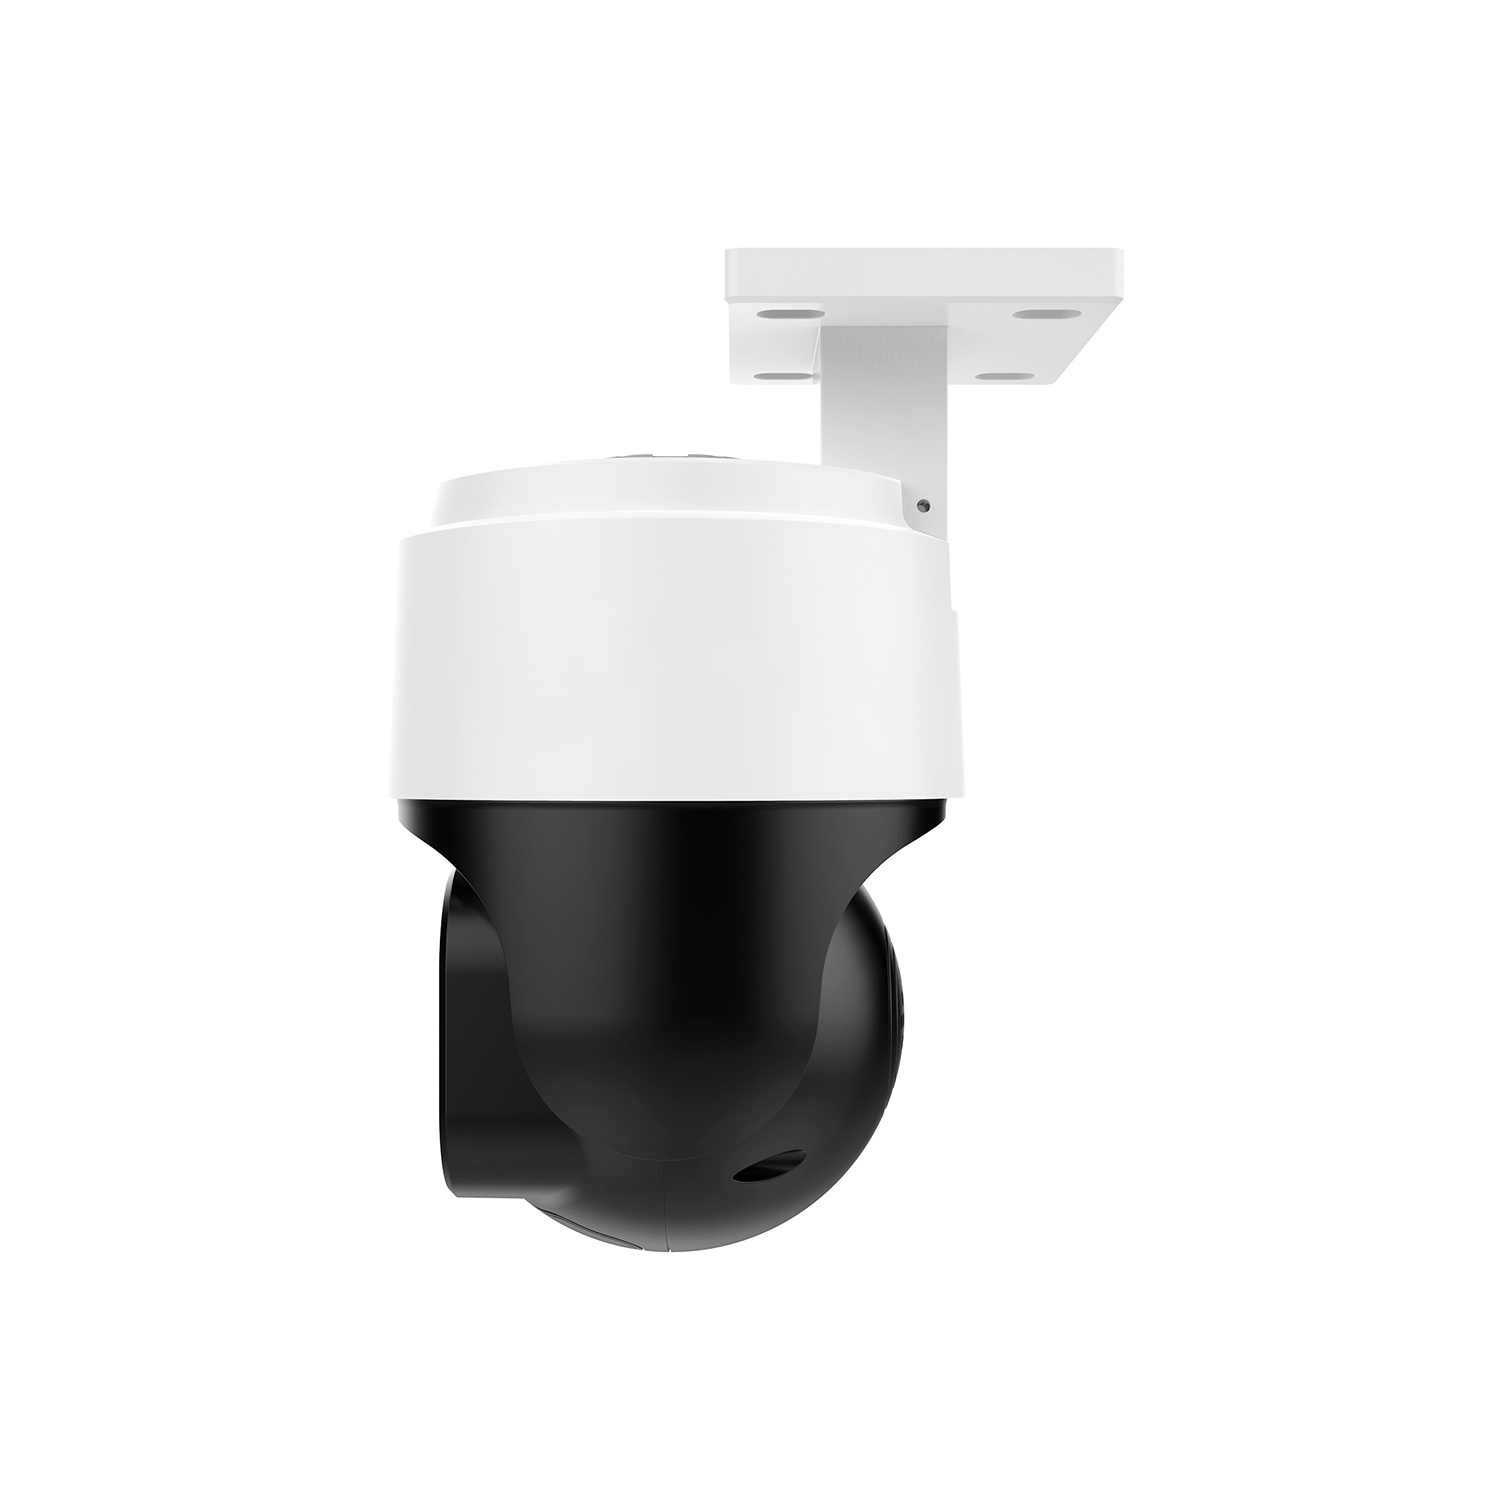 IP Camera WiFi Security Camera Waterproof 3MP for Outdoor Use CCTV